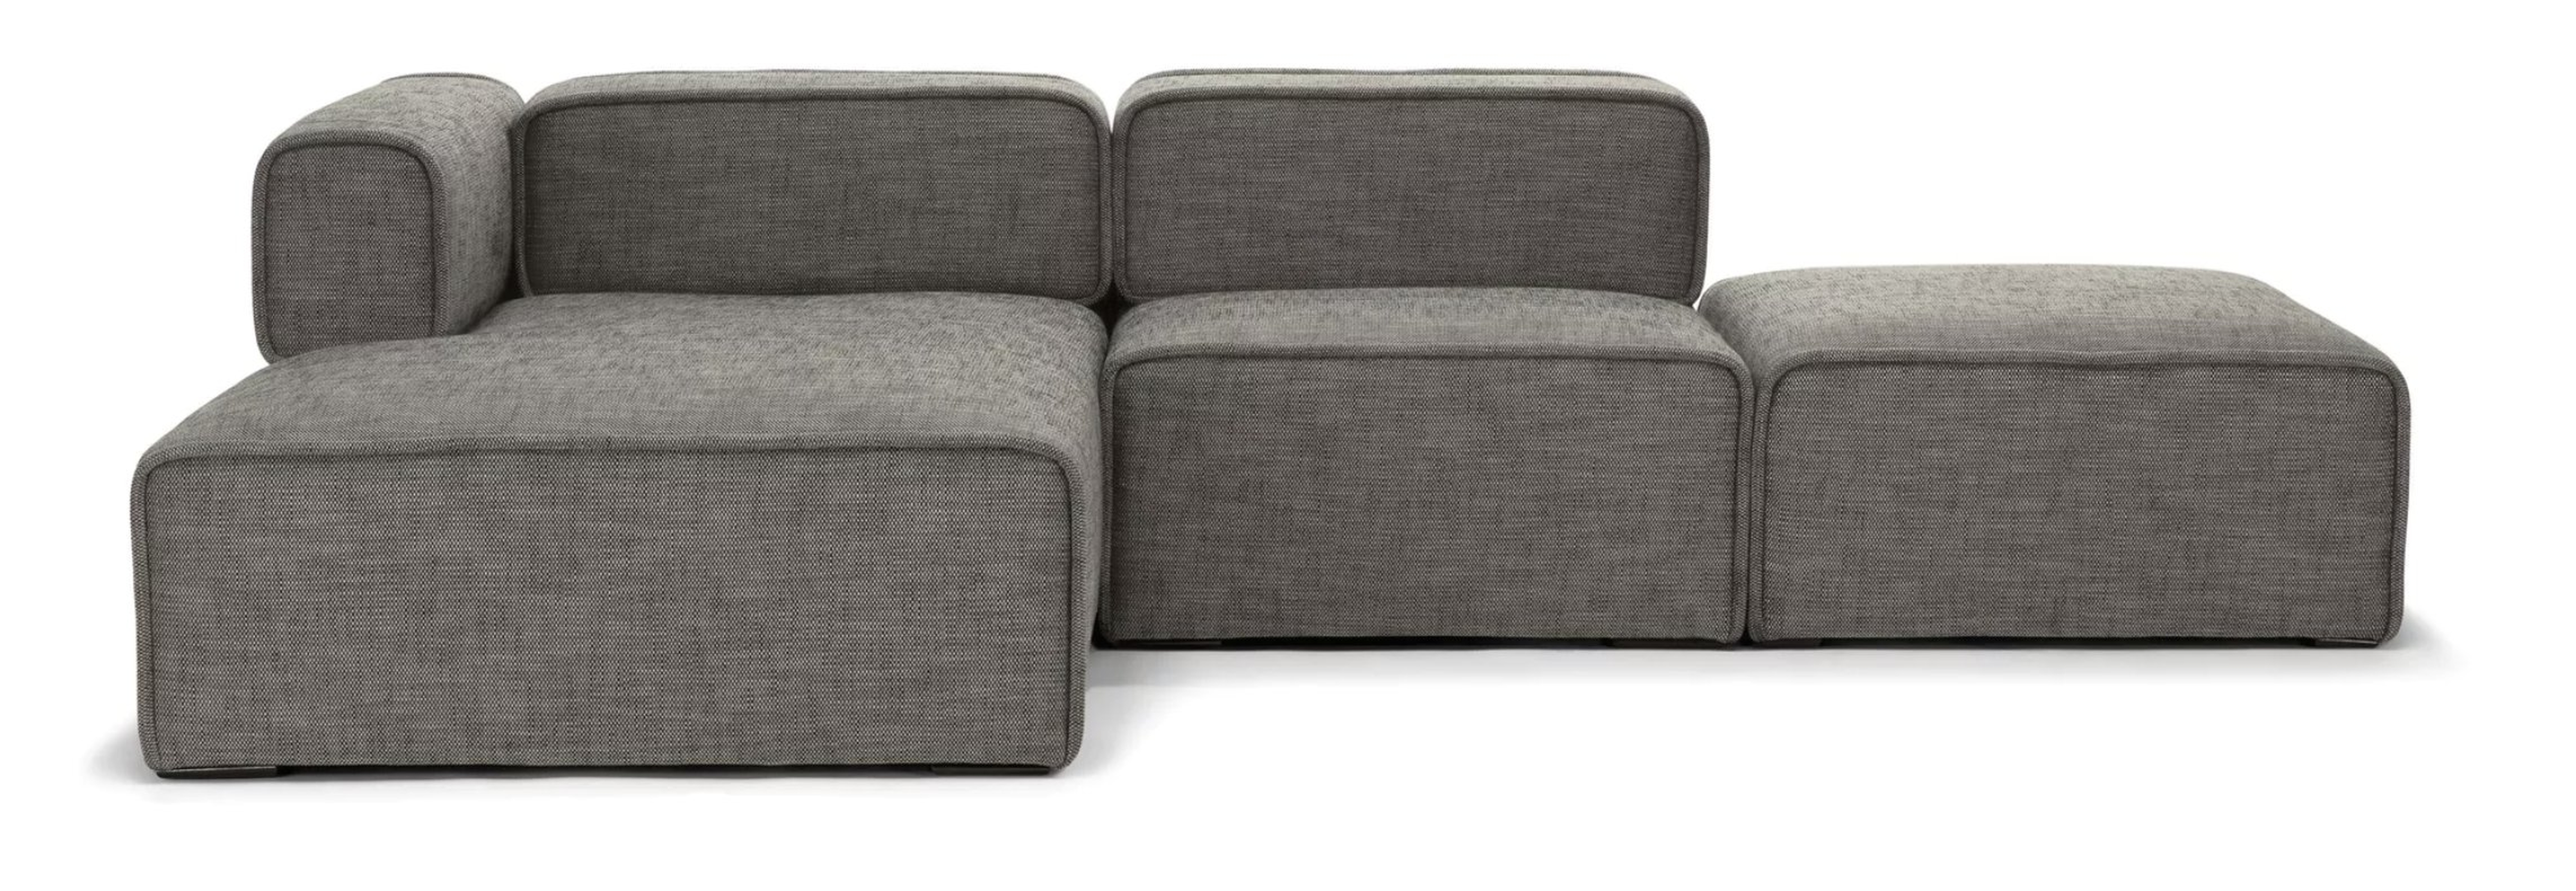 Quadra Left Sectional in Mineral Taupe - Article